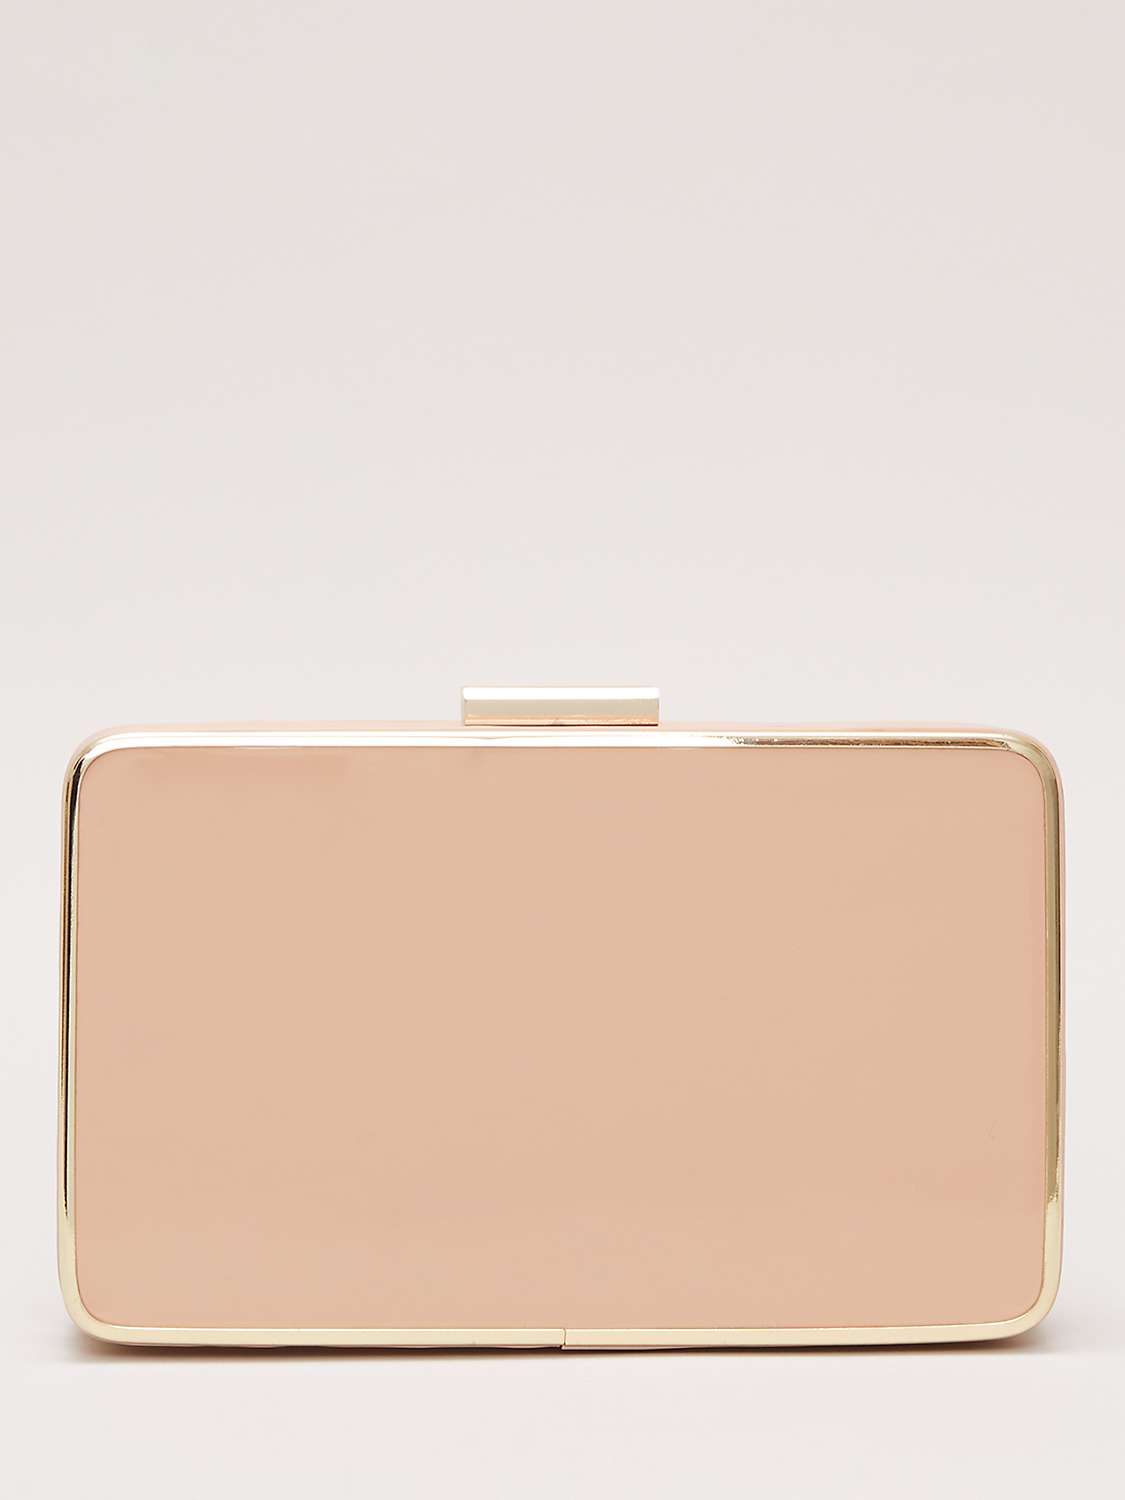 Buy Phase Eight Patent Box Clutch Bag, Pale Pink Online at johnlewis.com